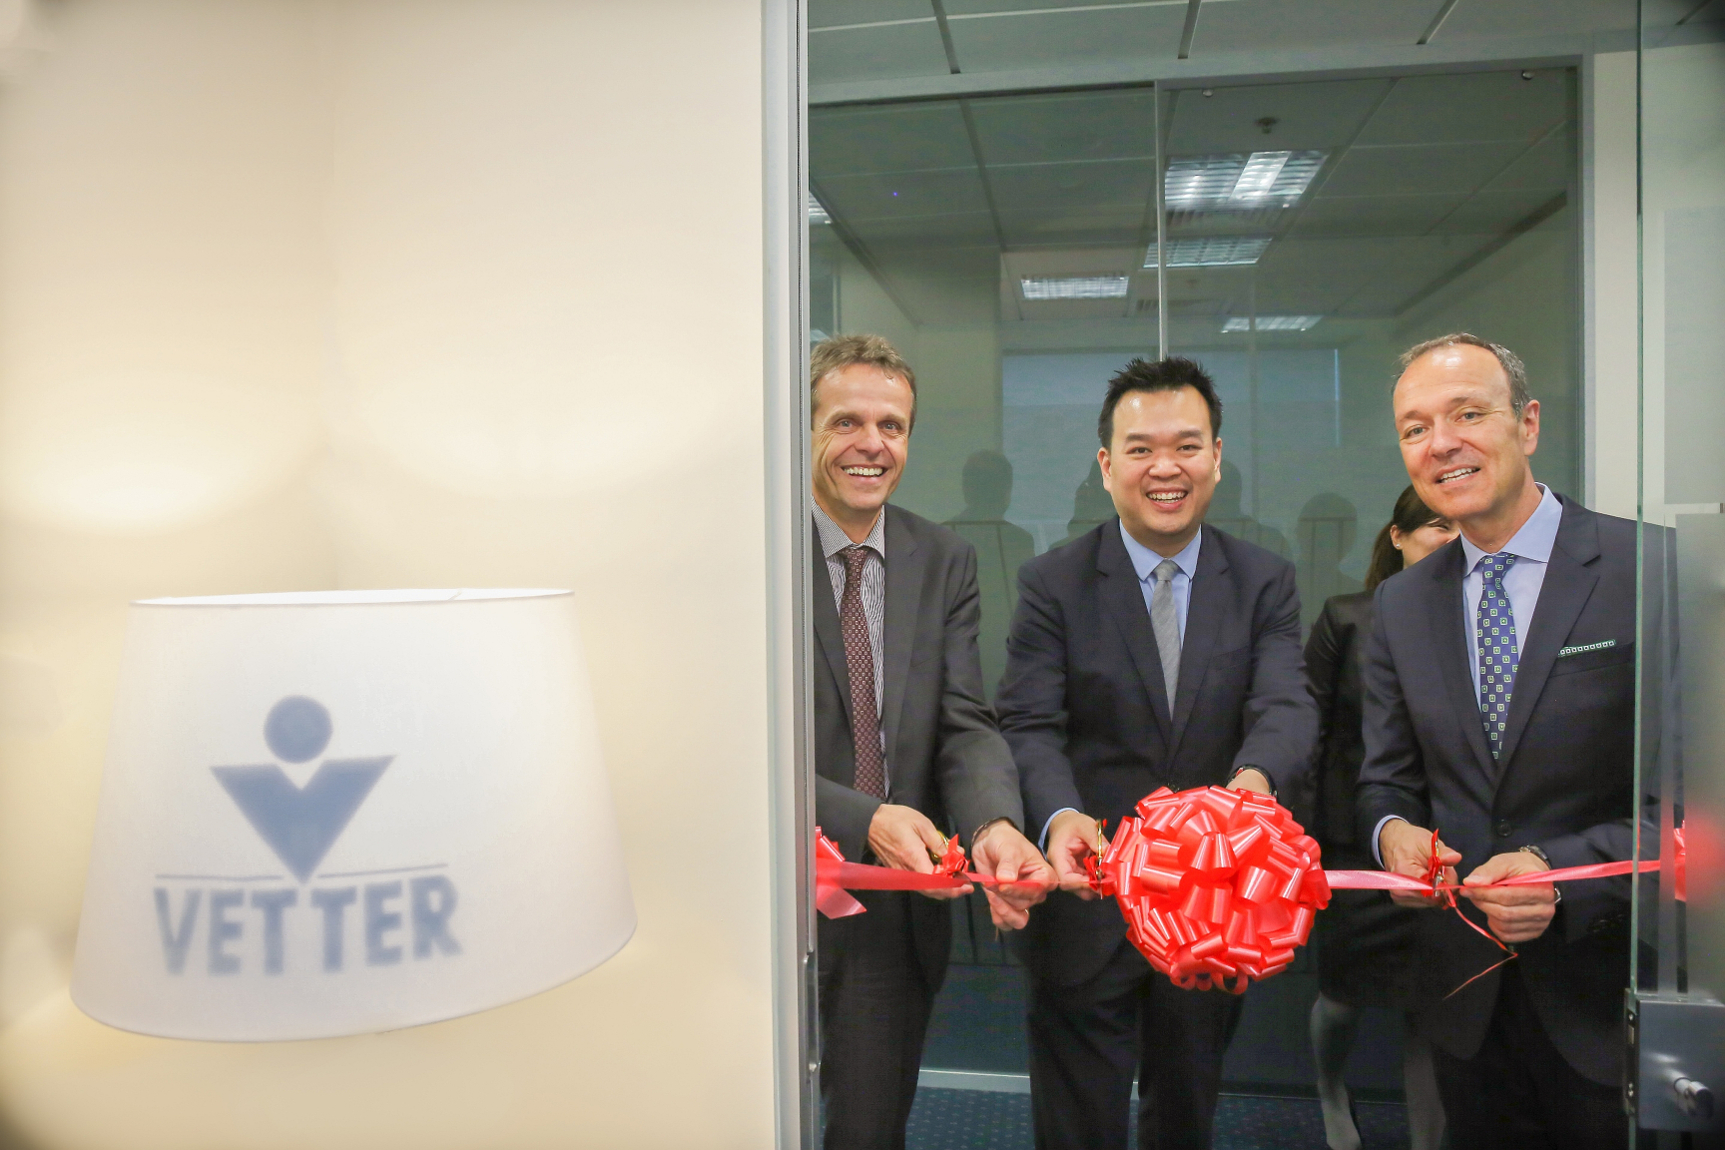 Vetter Announces Opening of Office to Support Growing Asian Healthcare Market